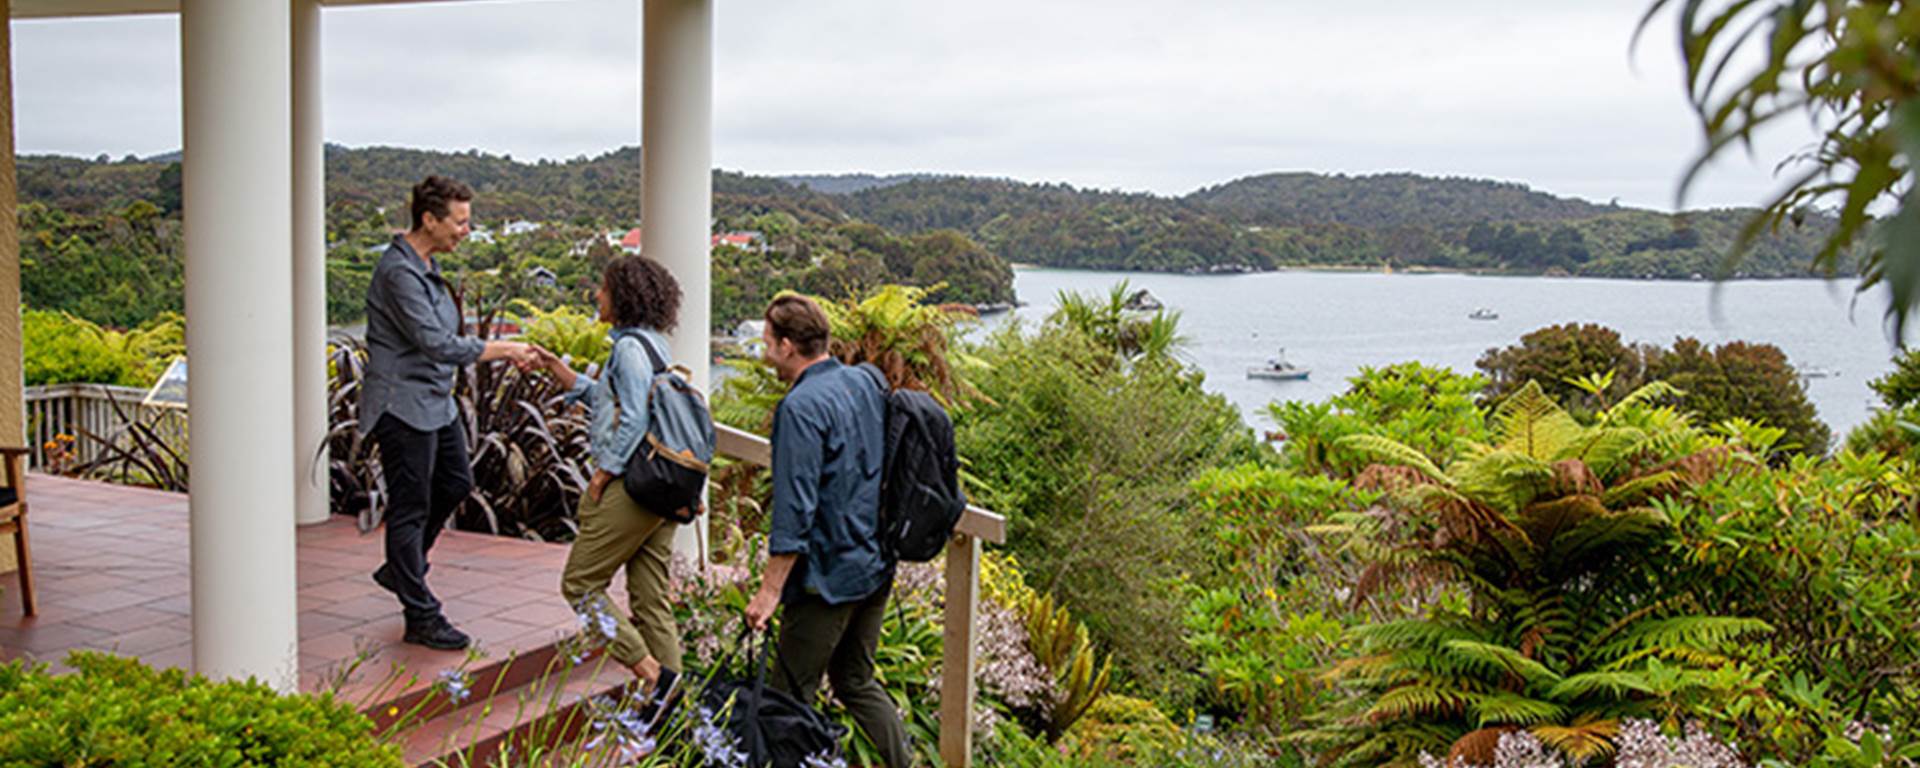 A couple being welcomed outside the Stewart Island Lodge